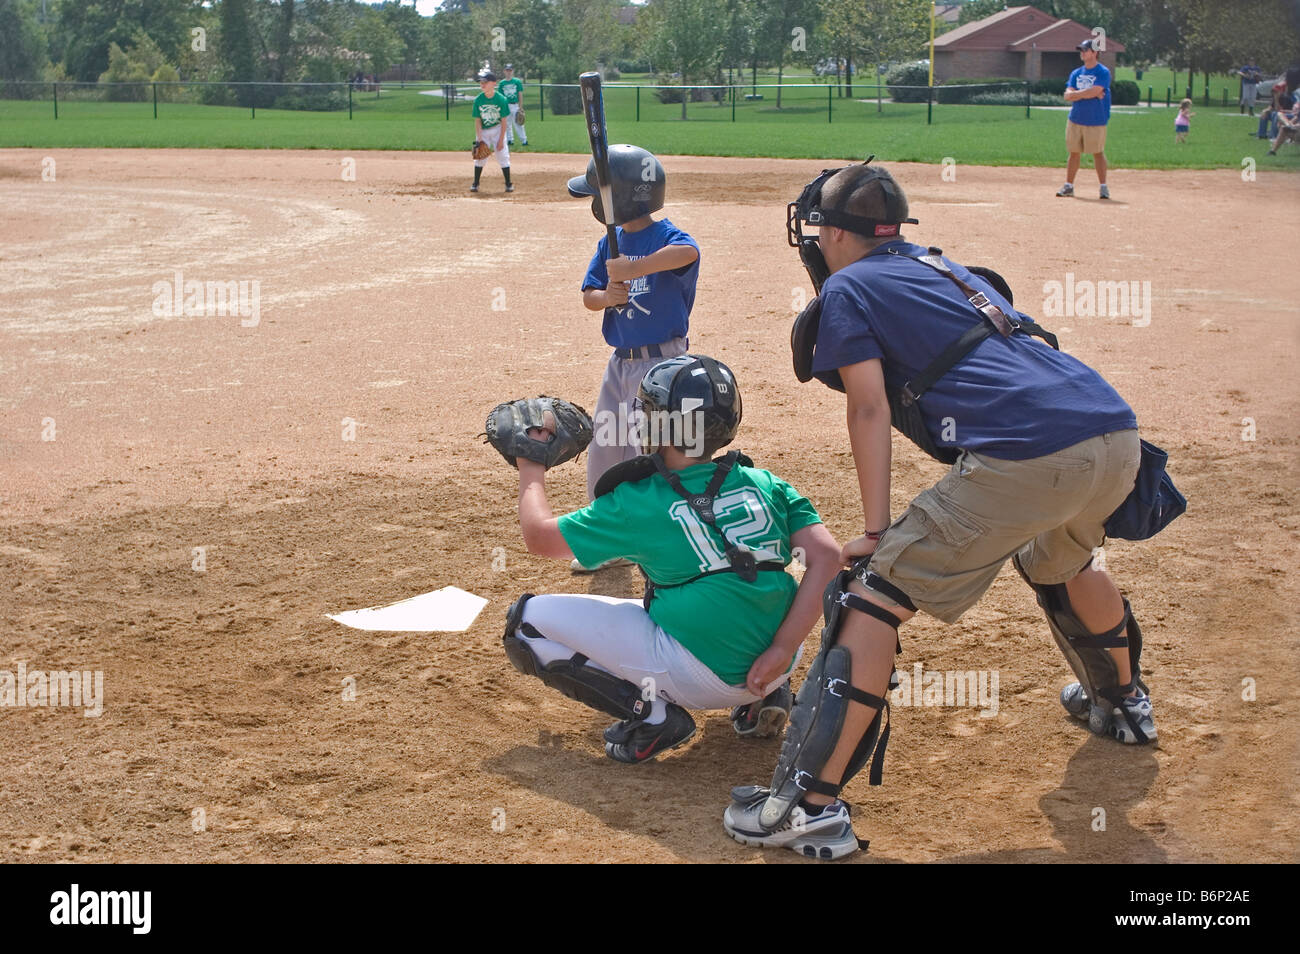 Baseball pitcher, batter and umpire in ready position Stock Photo - Alamy